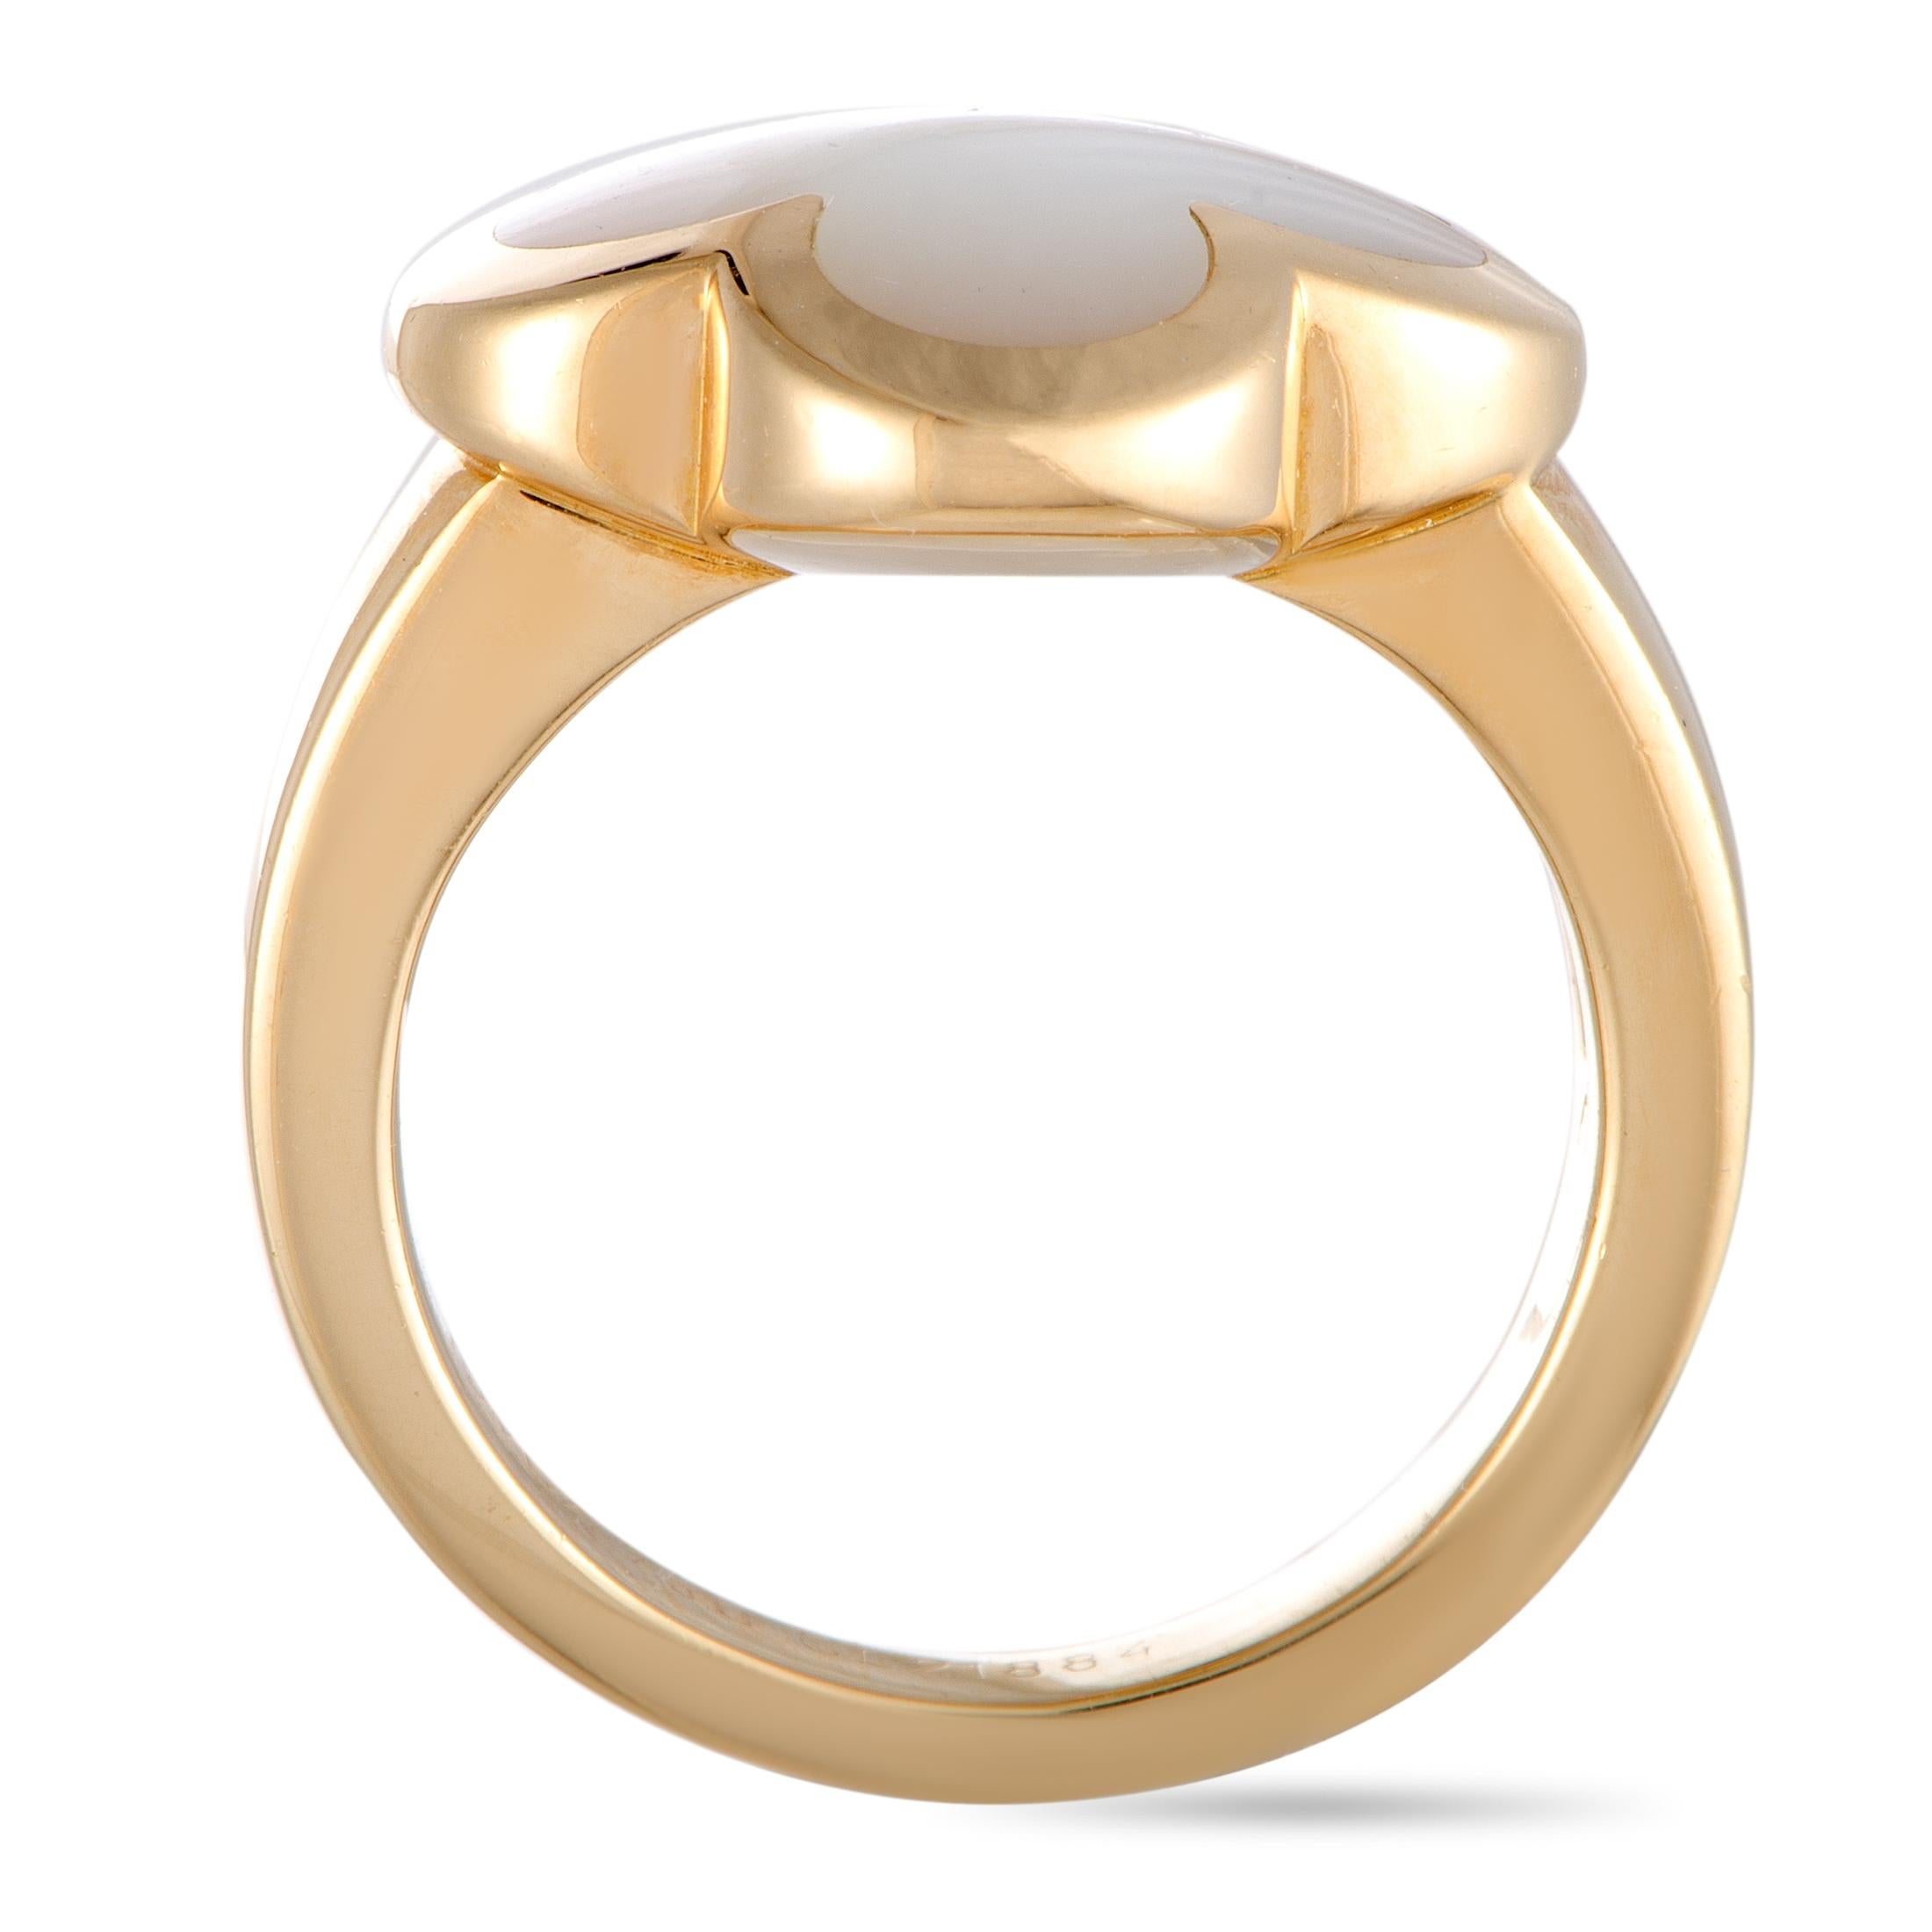 The Van Cleef & Arpels “Alhambra” ring is made out of 18K yellow gold and mother of pearl and weighs 9.9 grams. It boasts band thickness of 3 mm and top height of 4 mm, while top dimensions measure 16 by 16 mm.

This ring is offered in estate